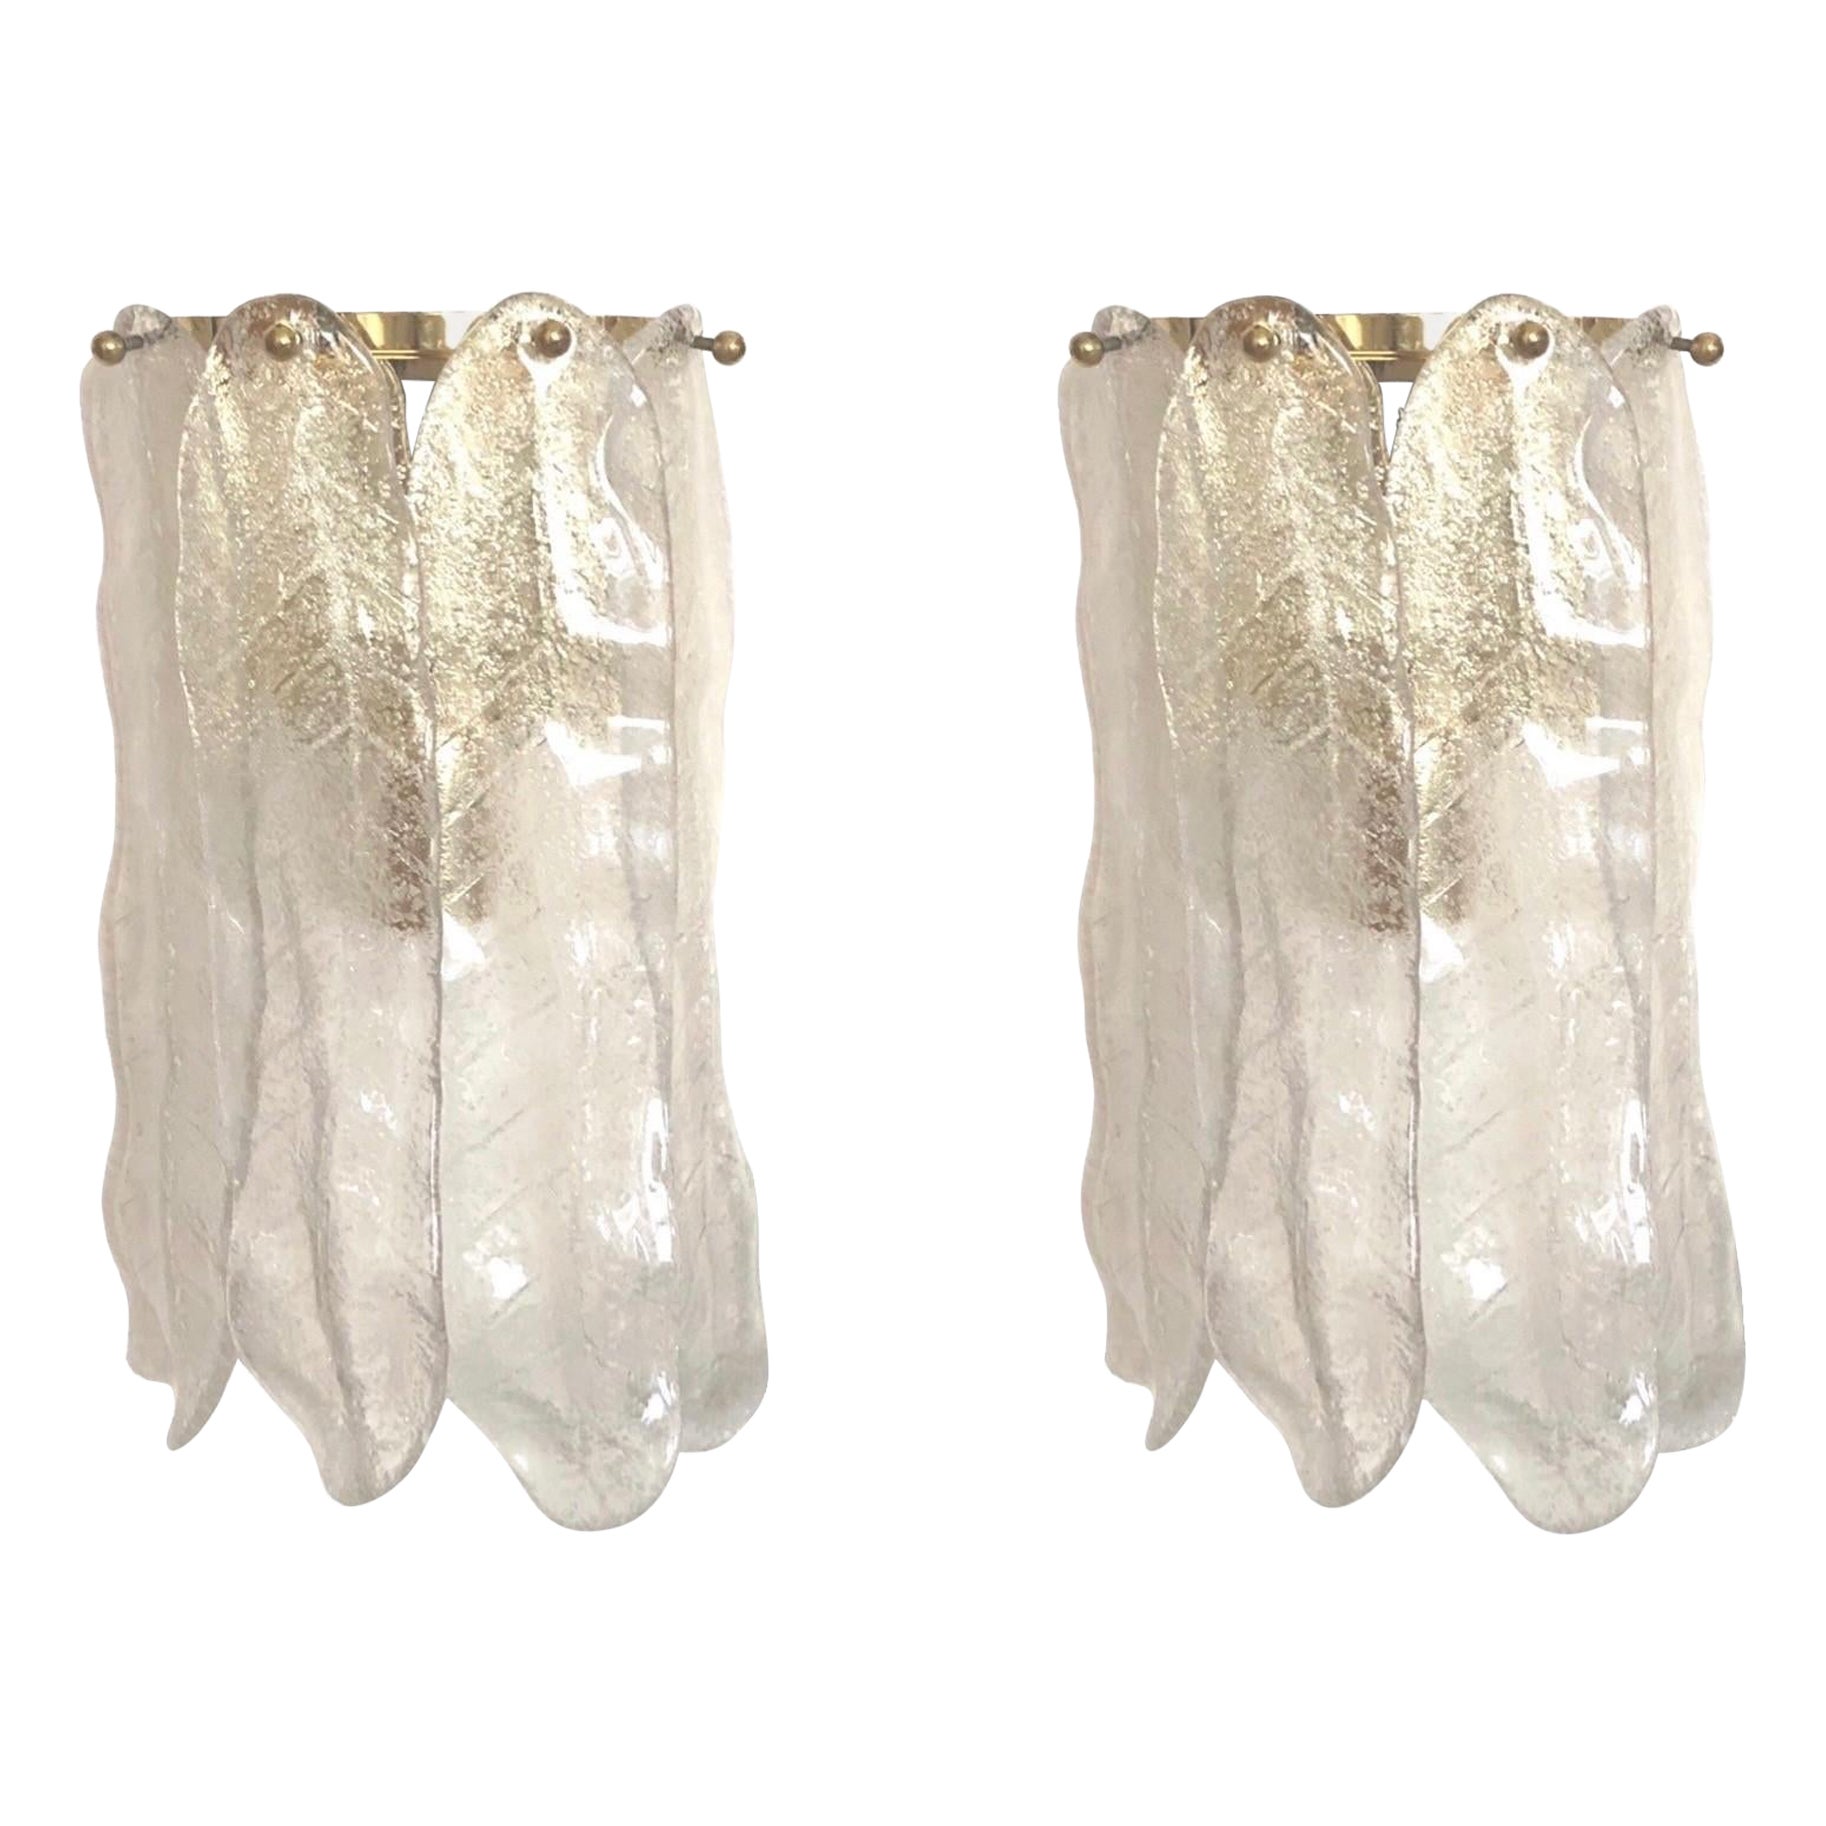 Italiian Midcentury Pair of Leaf Clear Murano Wall Sconces by Mazzega, 1970s